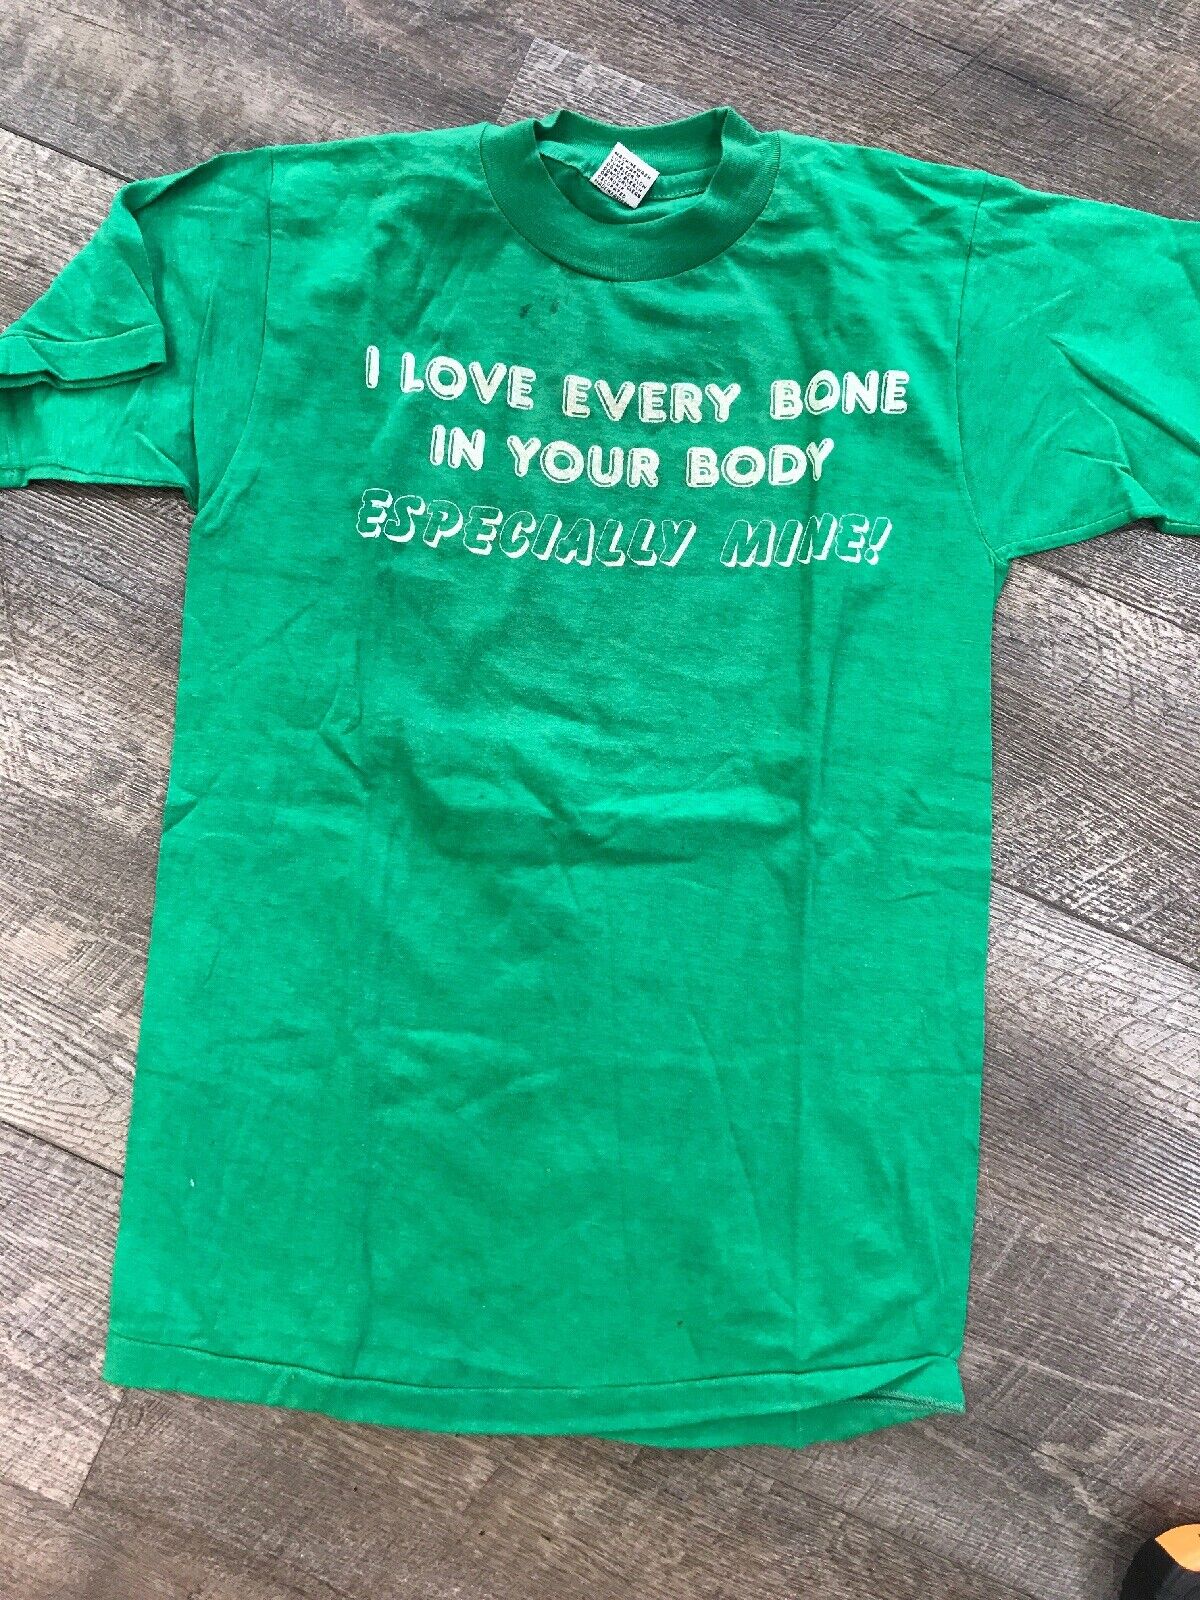 Vintage 1980s Single Stitched Love Every Bone In Your Body Funny T-Shirt Sz  S